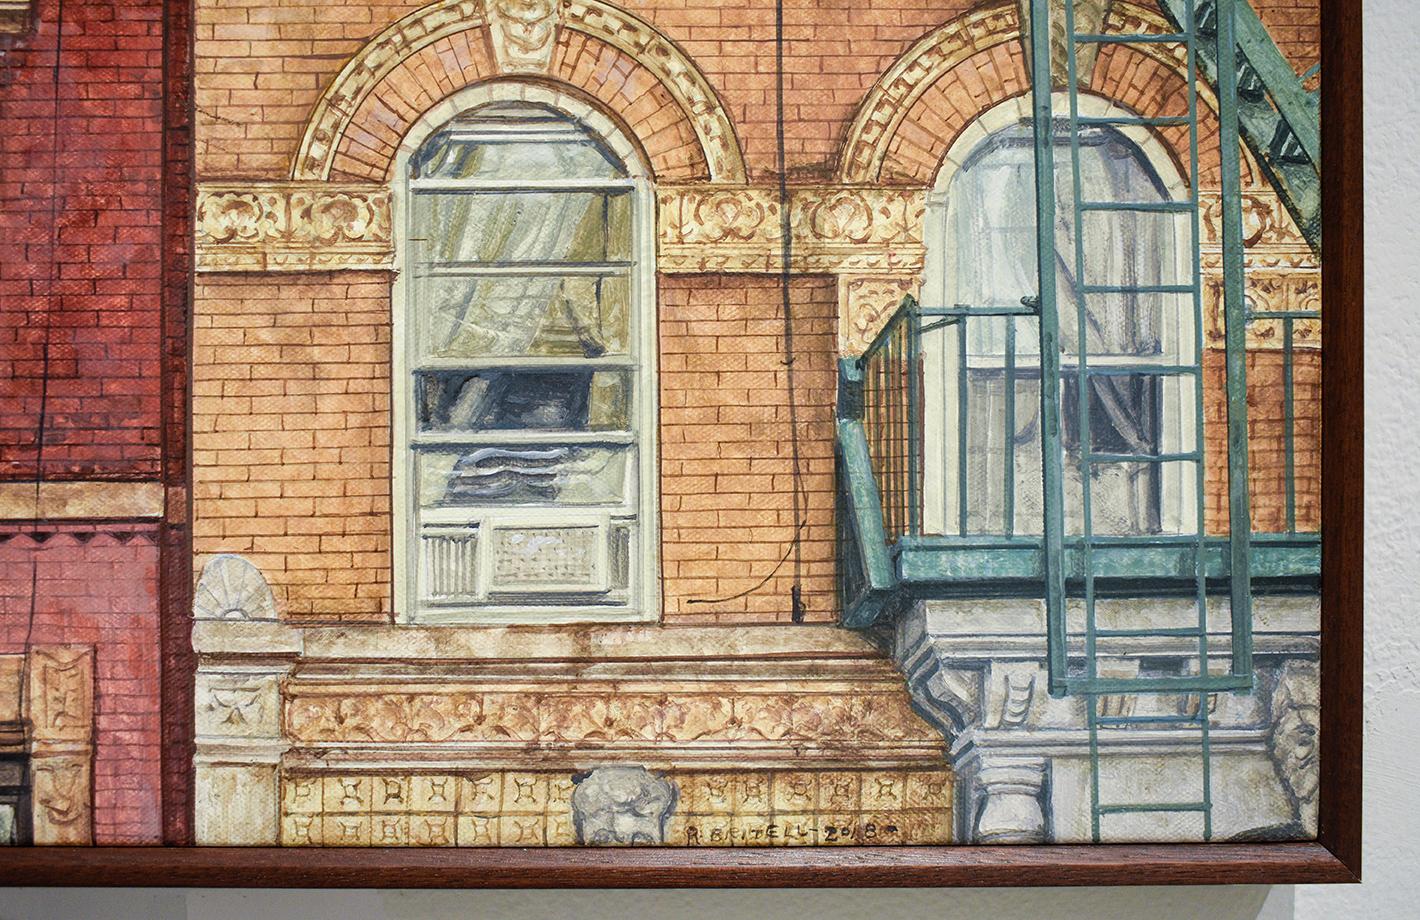 Photo-realist oil painting of a classic red and beige colored stone building exterior in New York City 
Oil on canvas mounted on panel in a handmade walnut frame
10 x 19.75 x 2 inches framed
Wire backing for seamless hanging

This contemporary,